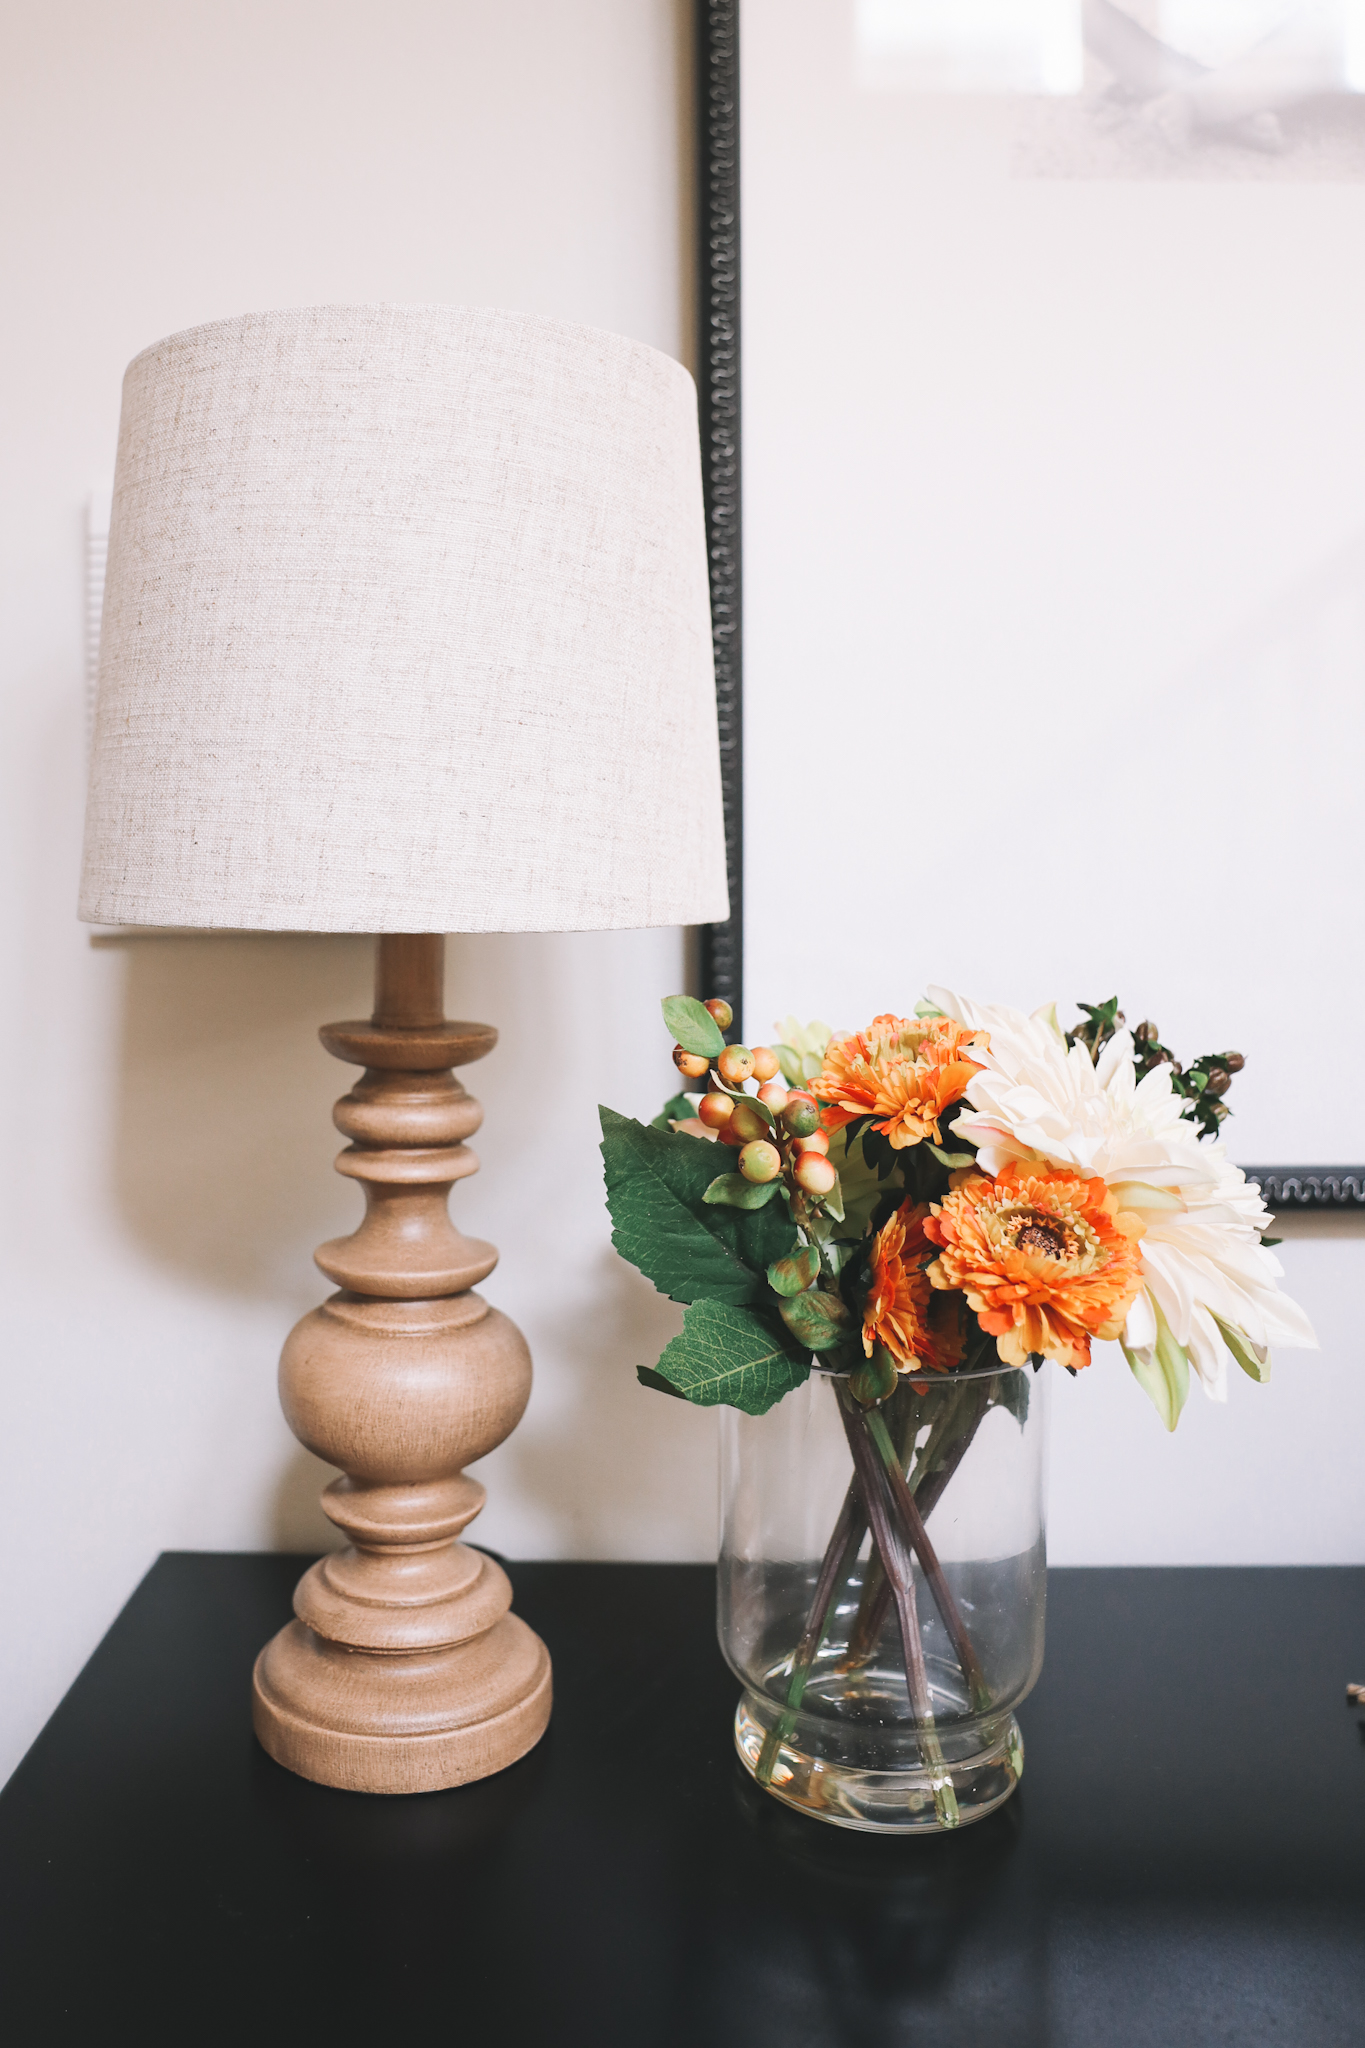 Decorating a Console Table for Fall